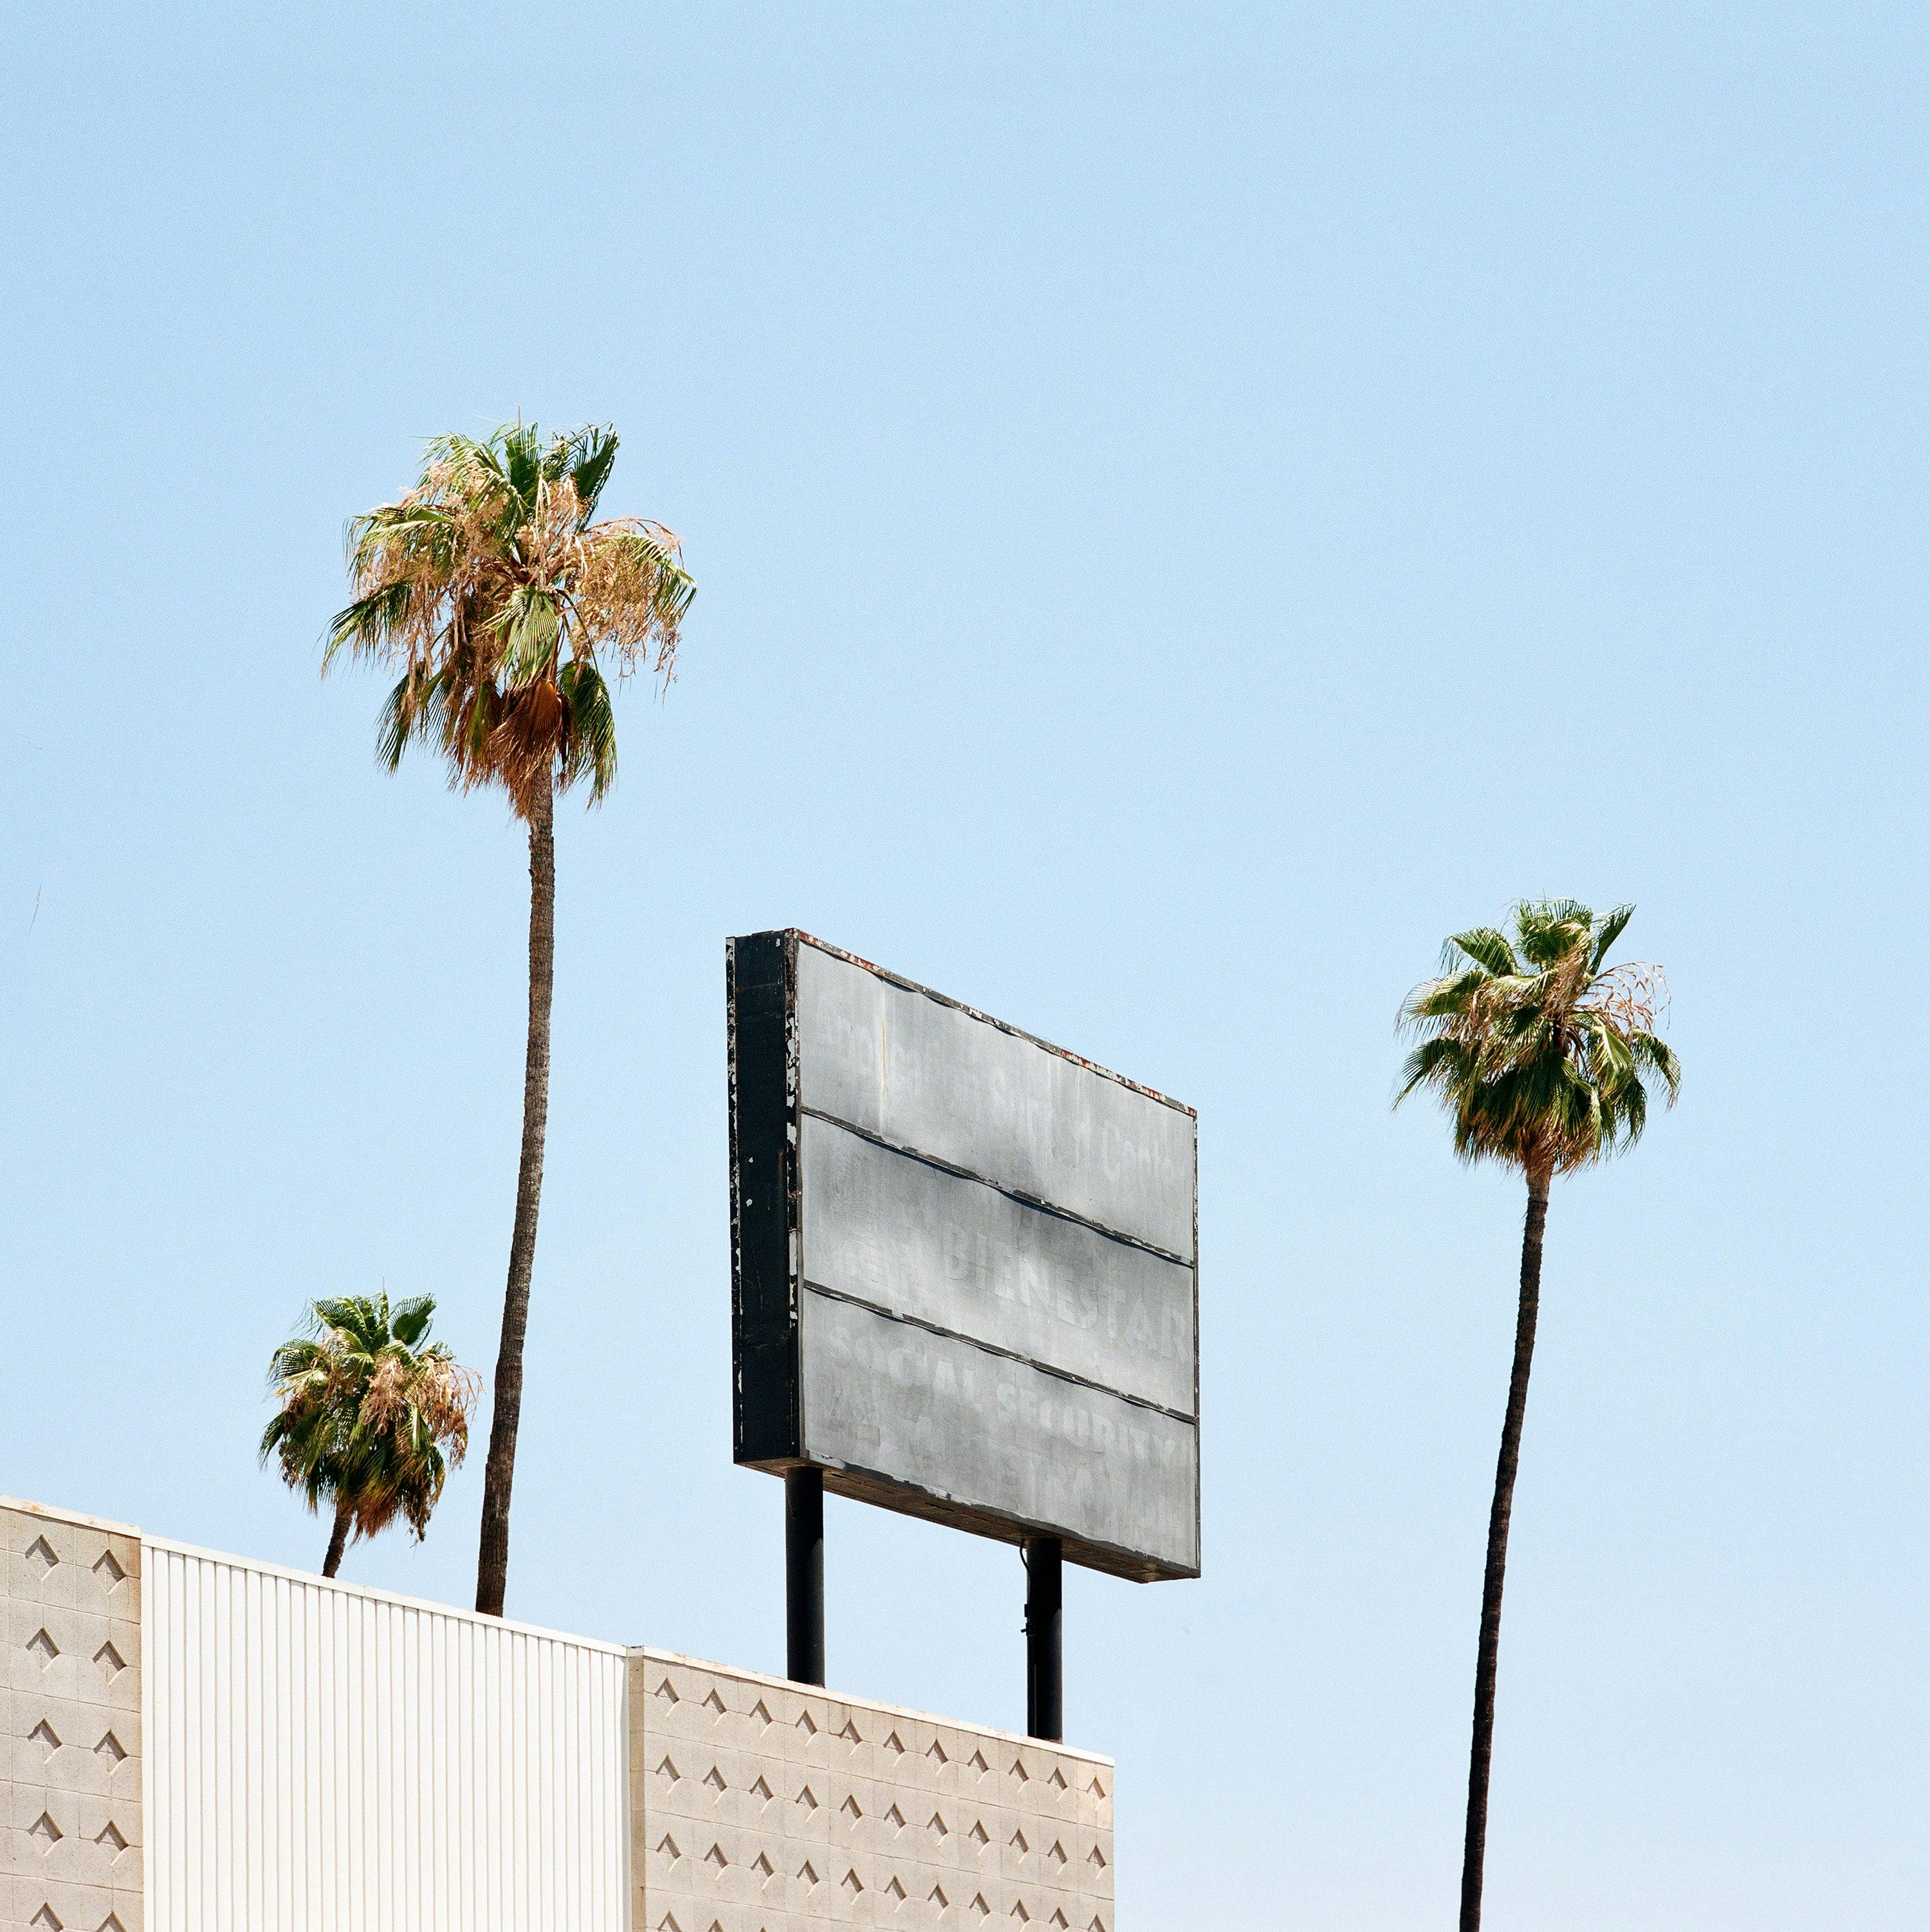 Photography by Sinziana Velicescu titled "Van Nuys, CA".